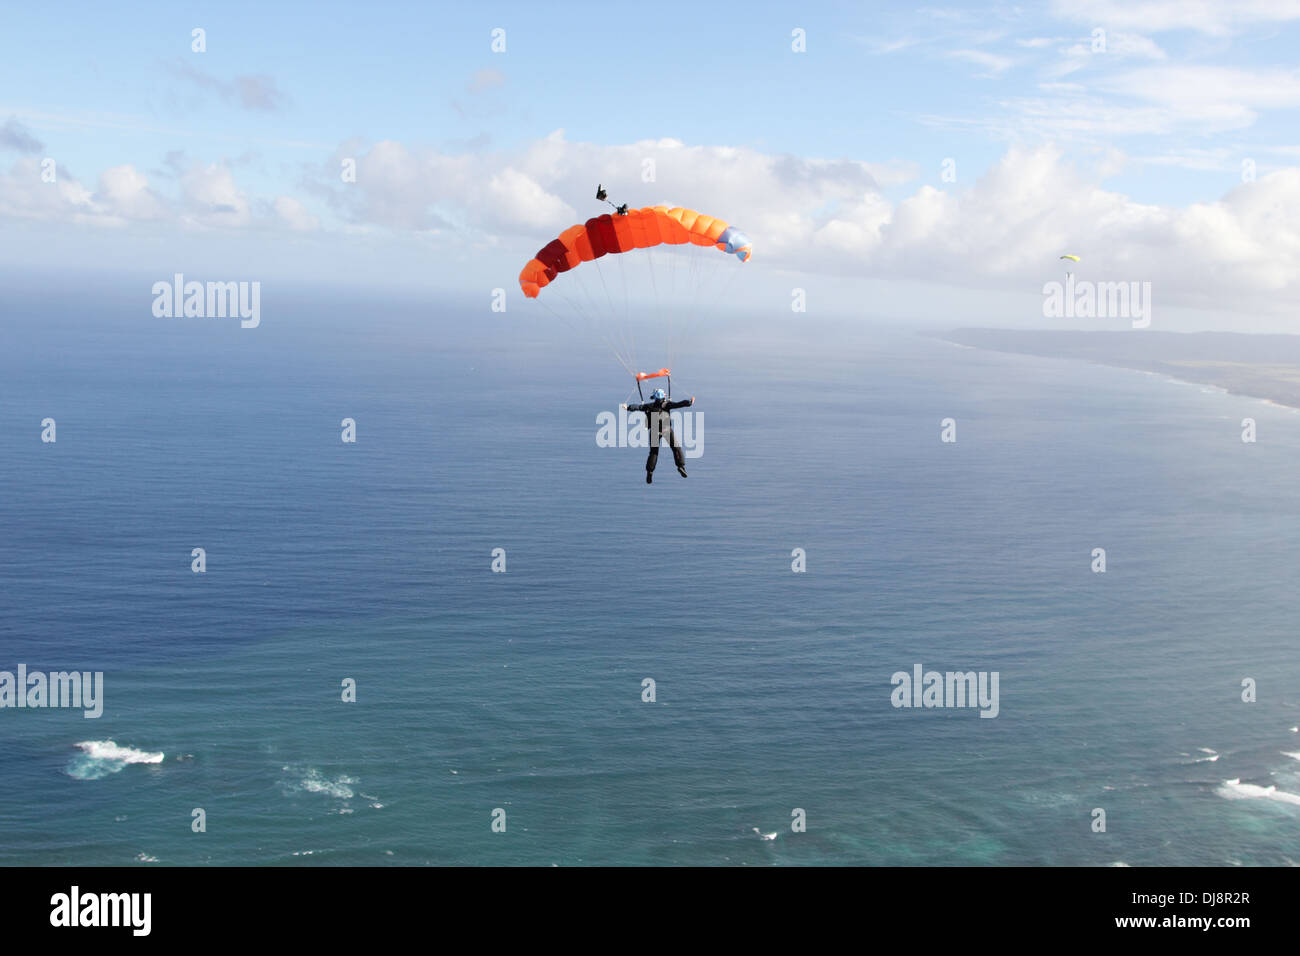 Skydiver under canopy is flying high in the sky over clouds into direction open sea. She is looking for a suitable landing area! Stock Photo